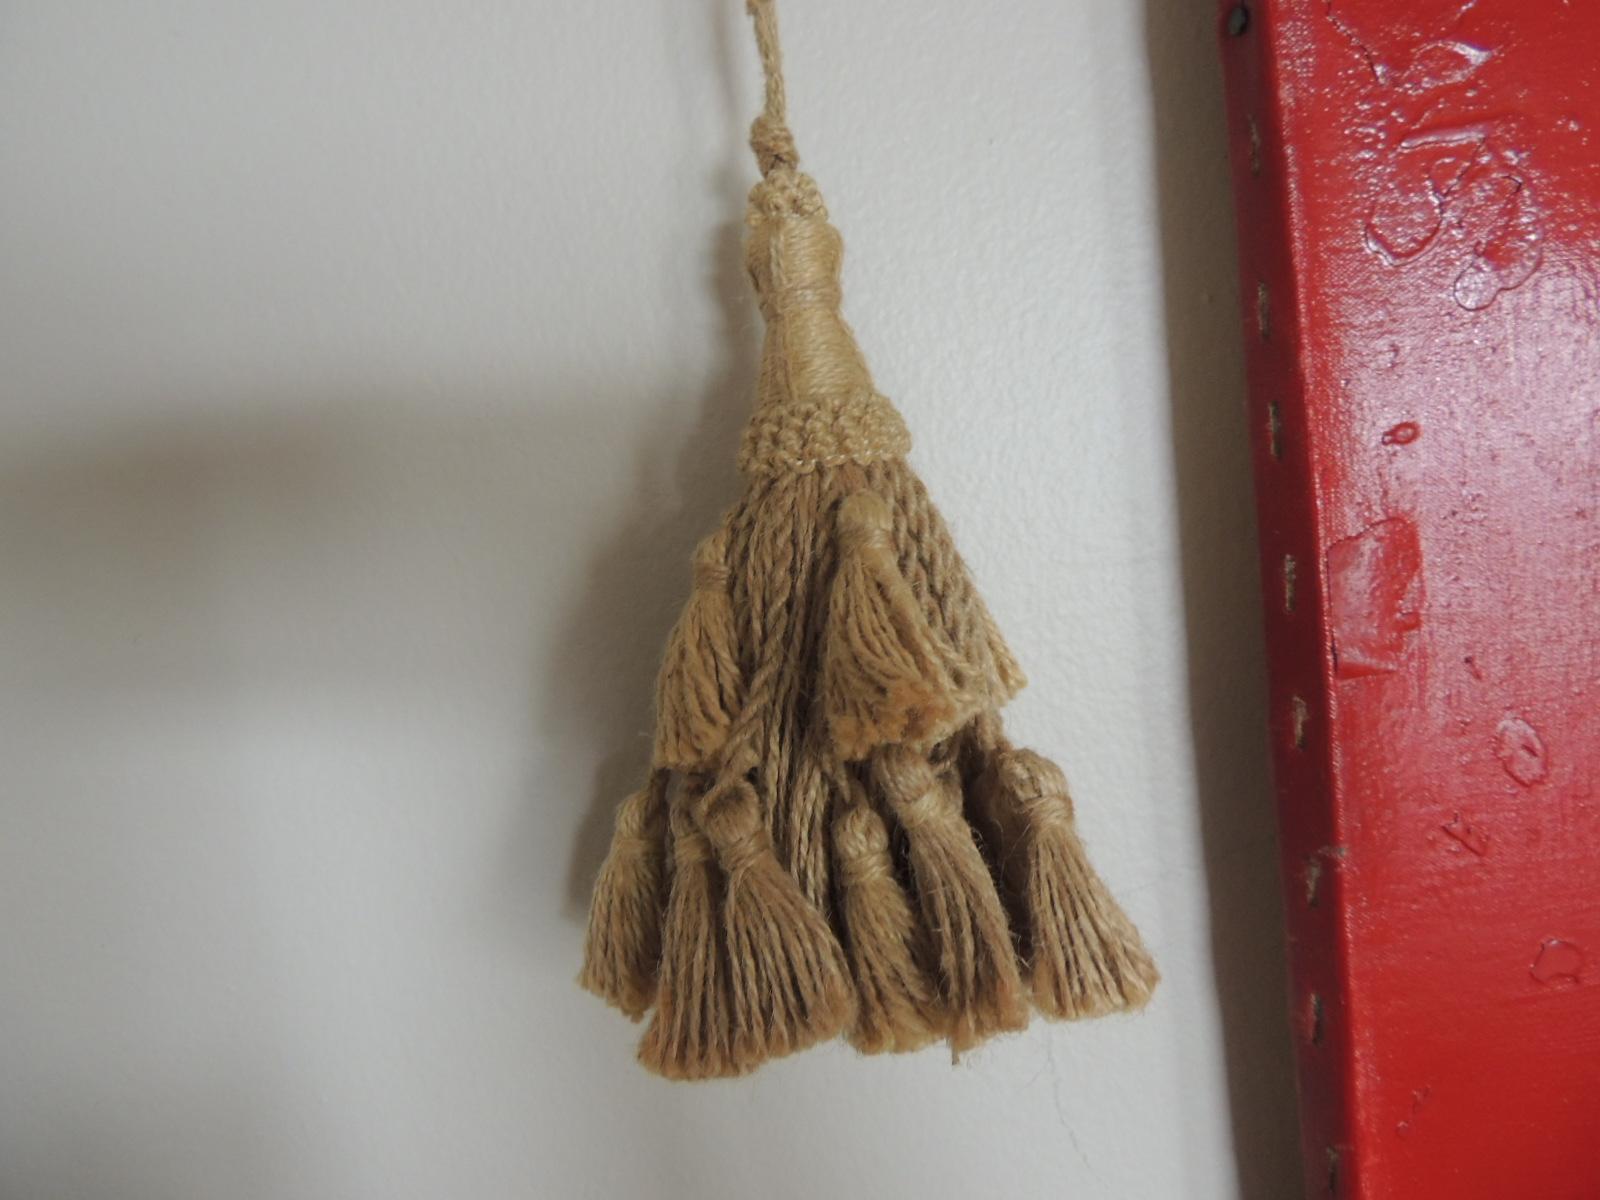 Pair of Summer Jute and Twine tassels on rope.
Size: 4